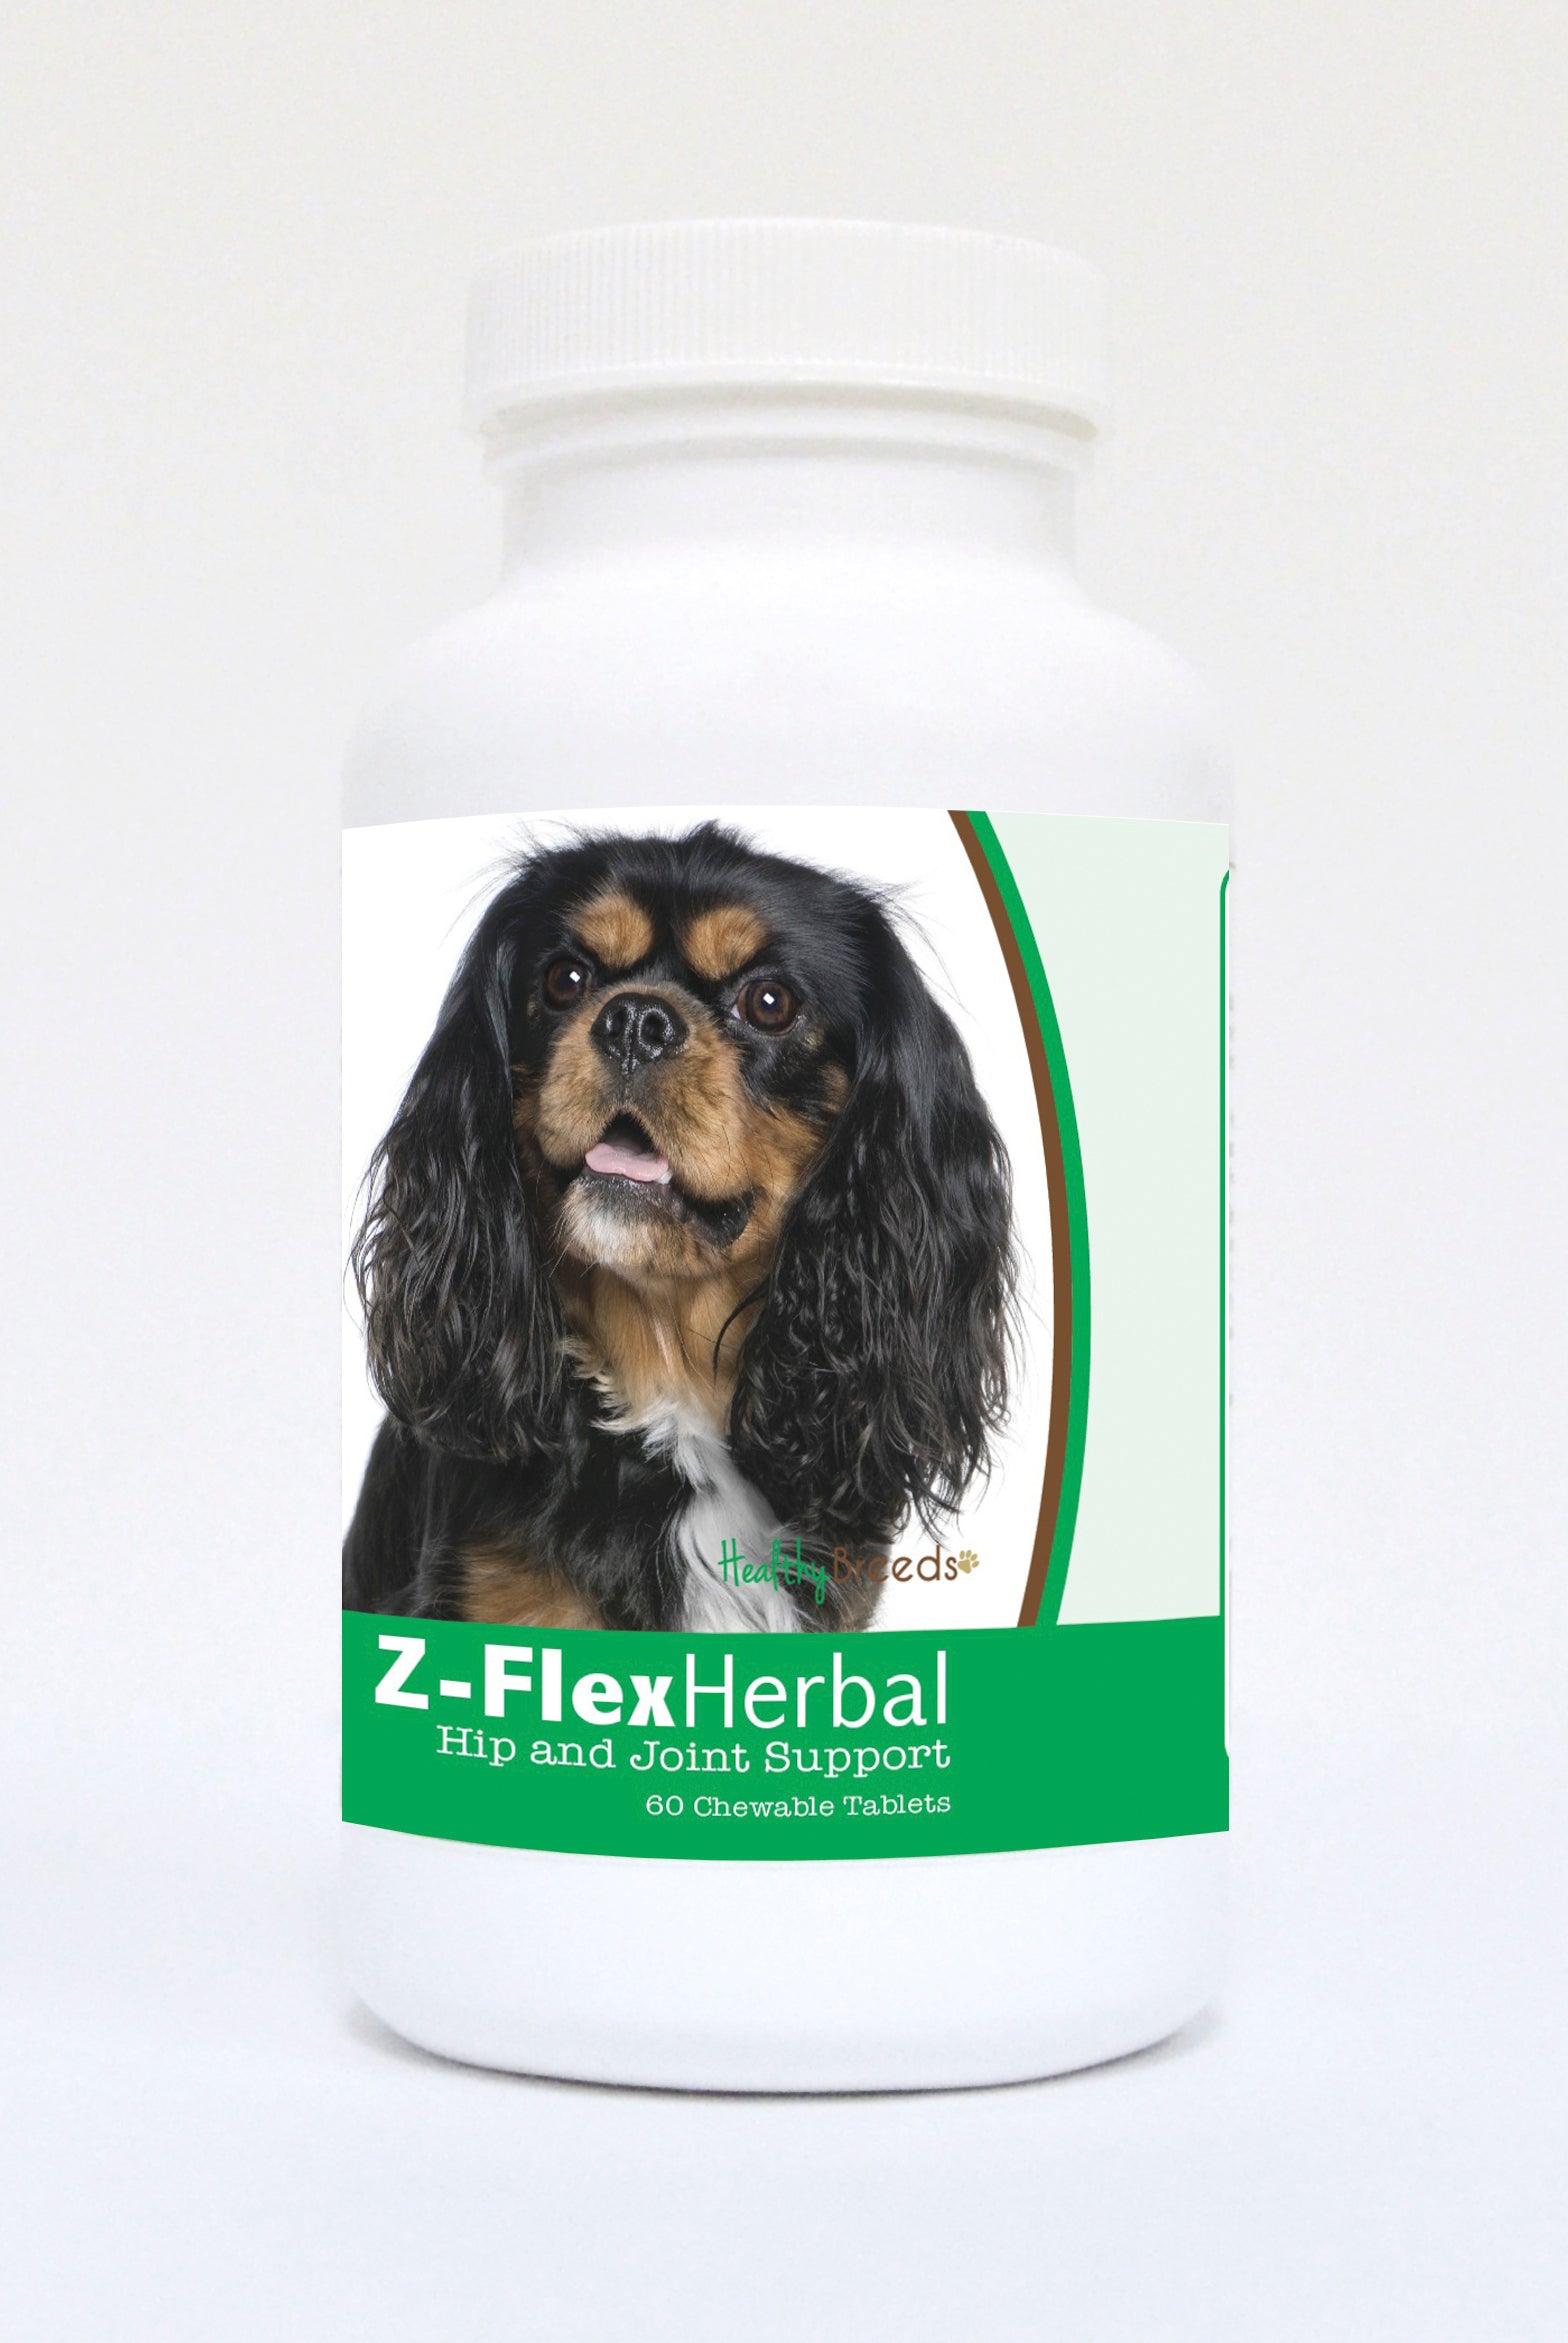 Cavalier King Charles Spaniel Natural Joint Support Chewable Tablets 60 Count